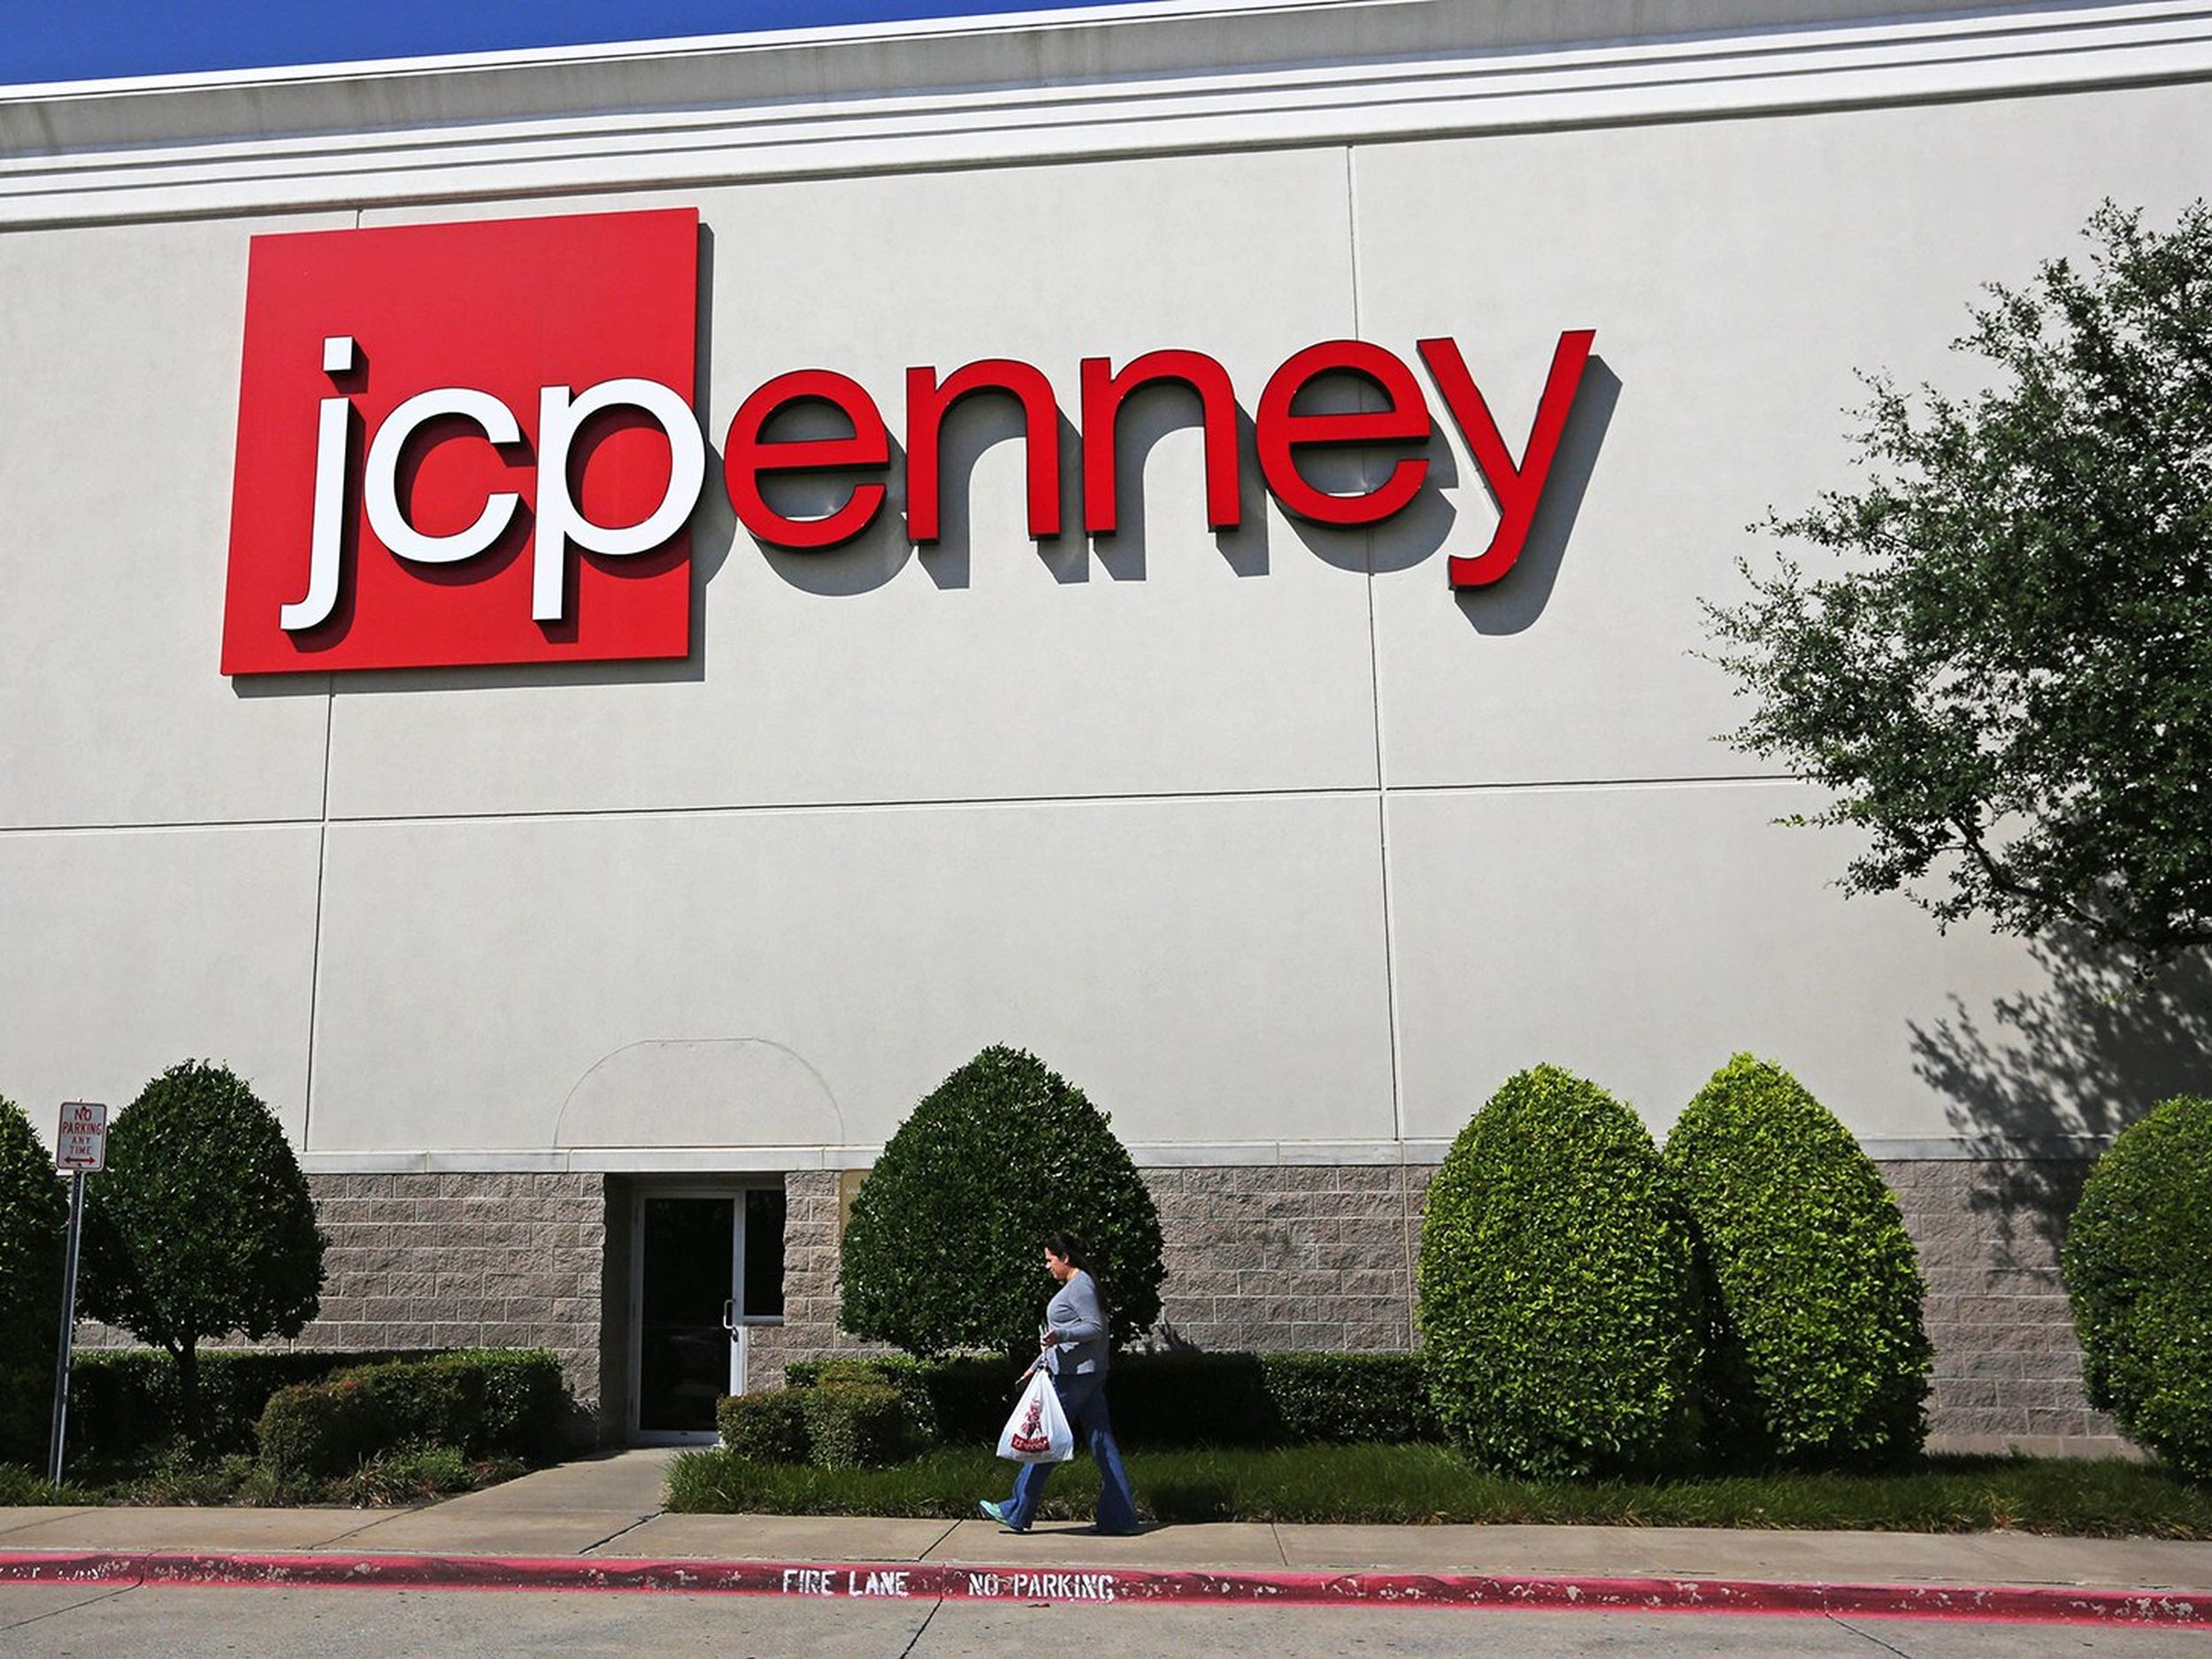 JCPenney Makes Up With Sephora, but Bankruptcy Looms